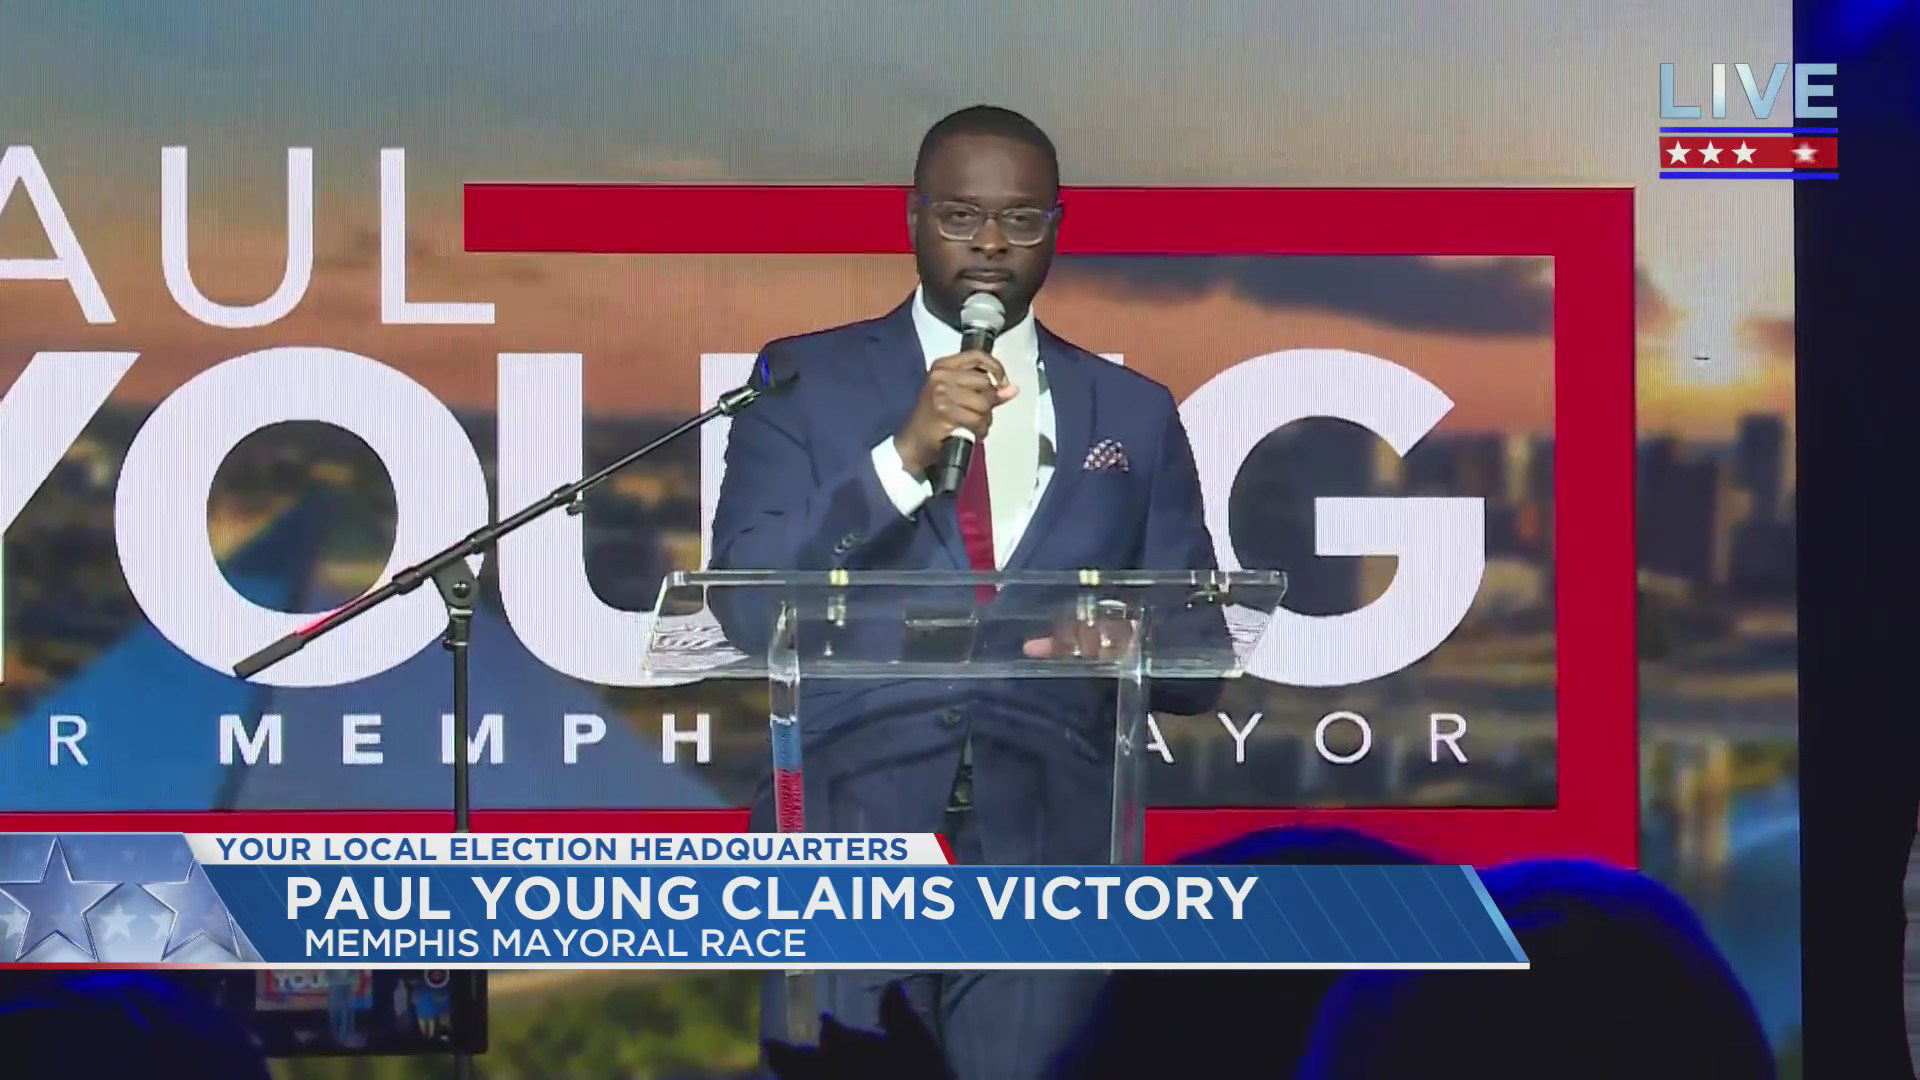 Paul Young claims victory in Memphis mayoral election